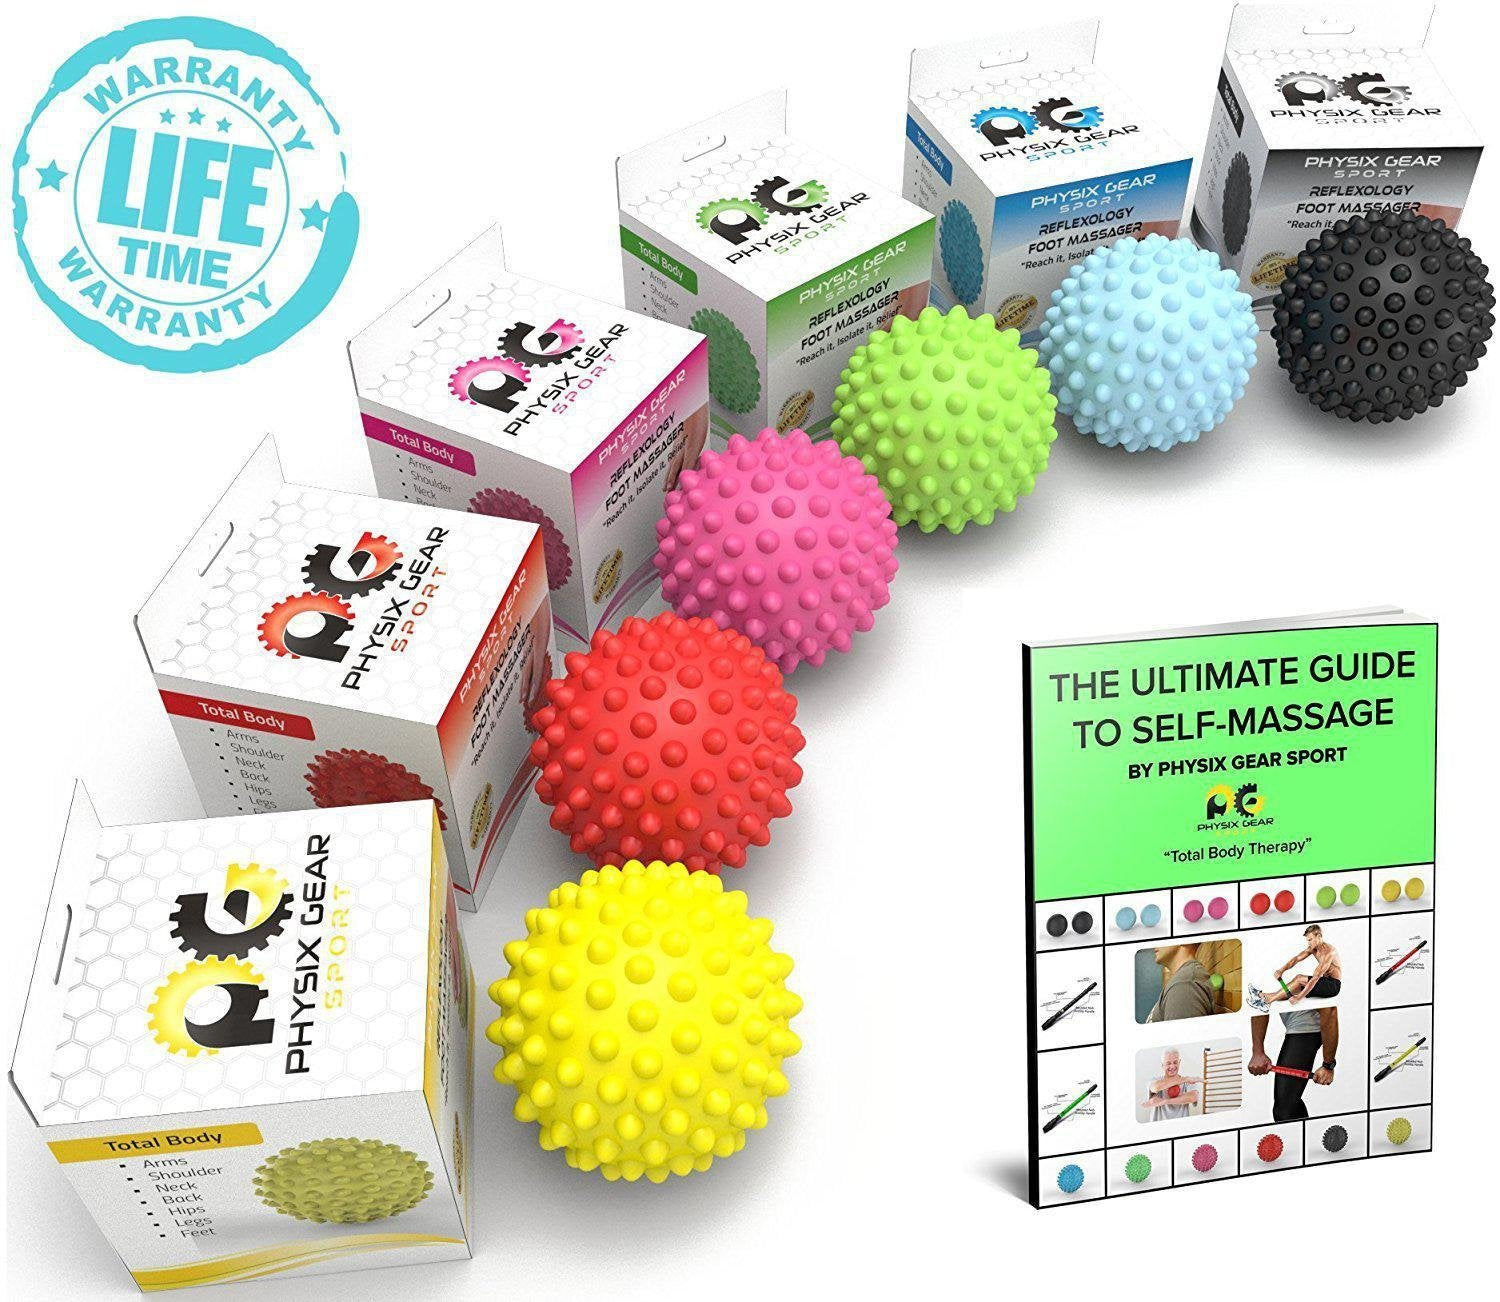 Go for cost-effective massage therapy with the trigger point massage balls-Physix Gear Sport